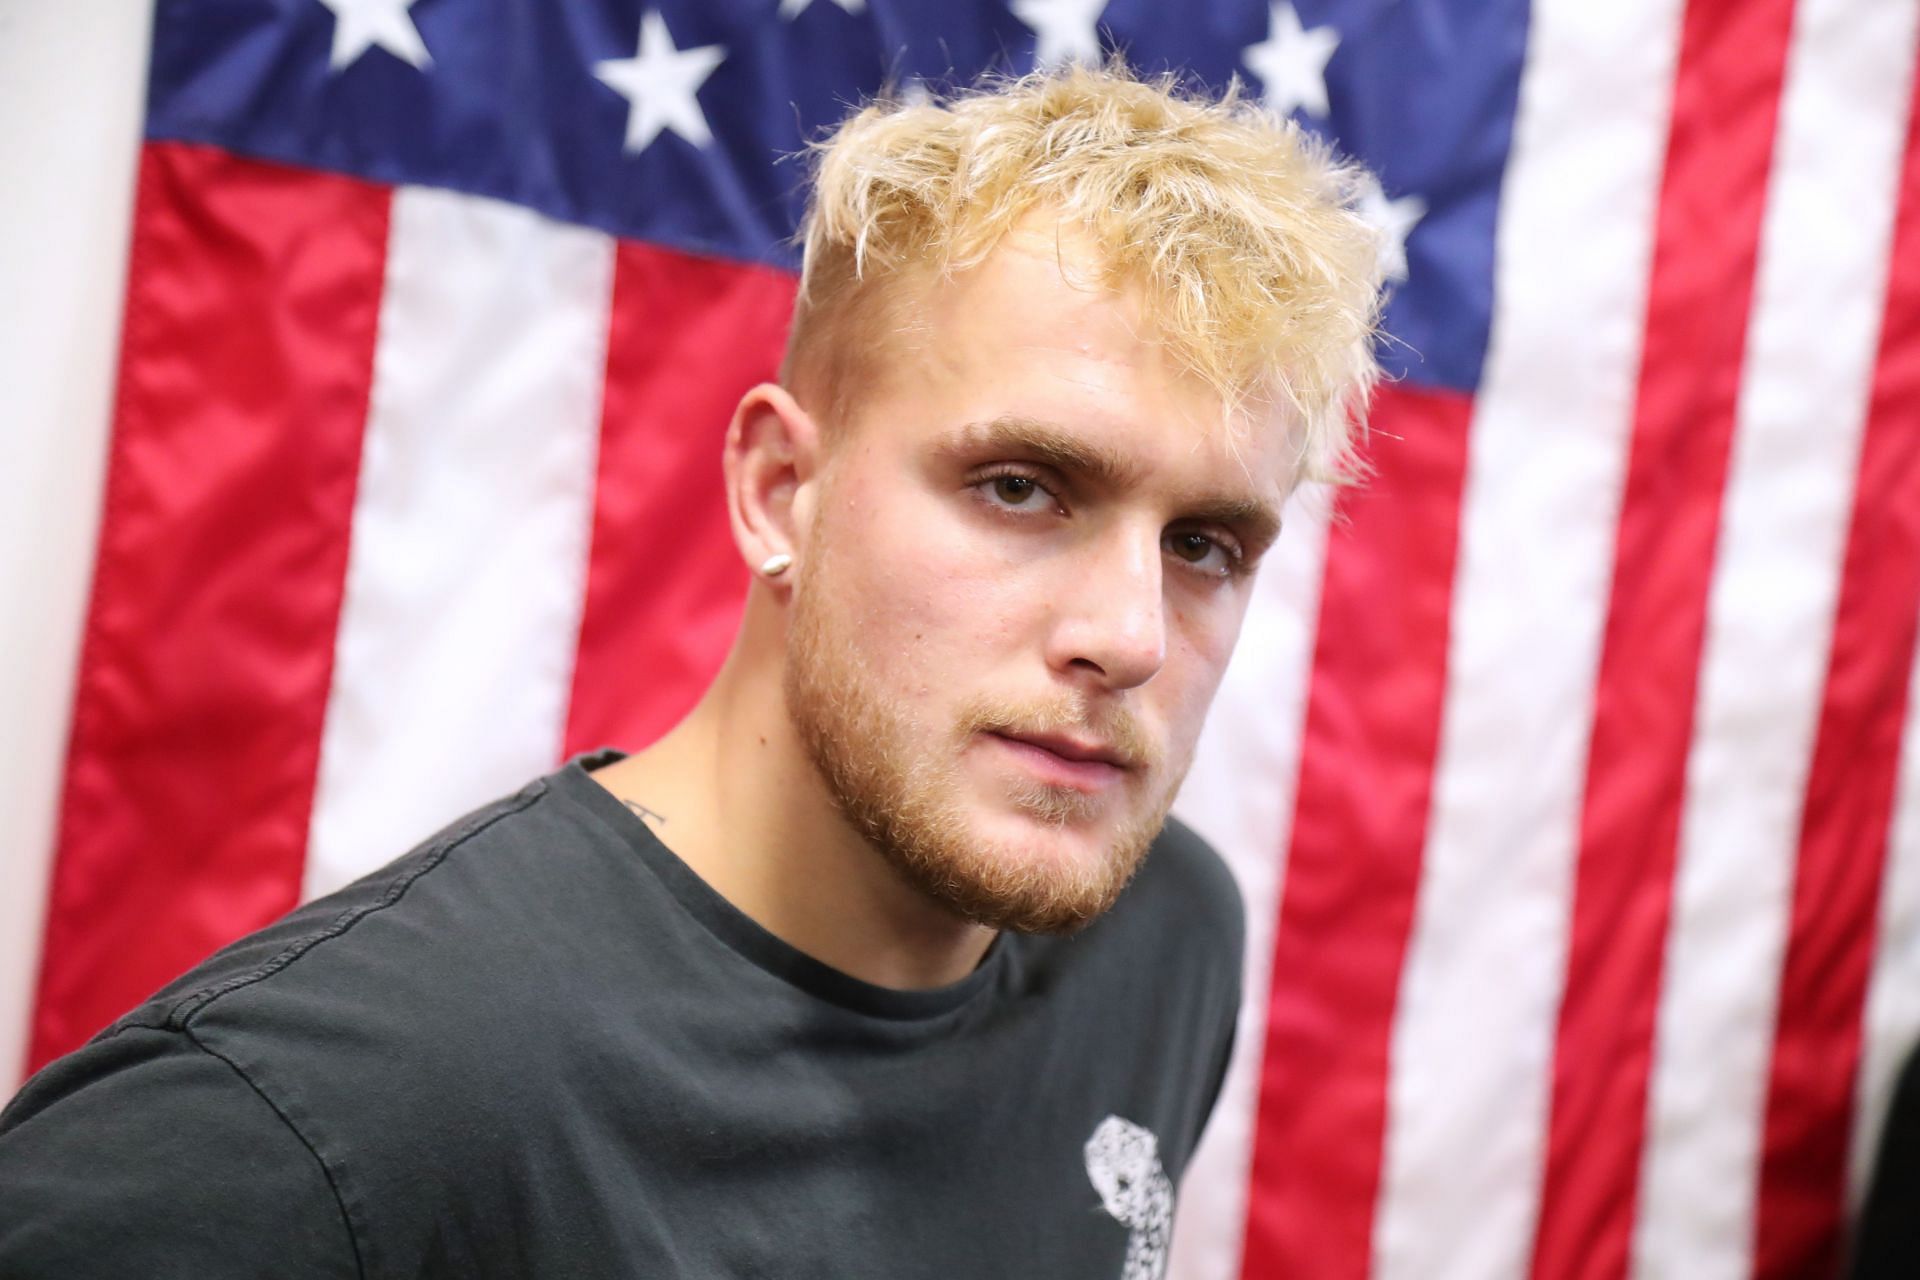 Jake Paul posing in front of the American flag